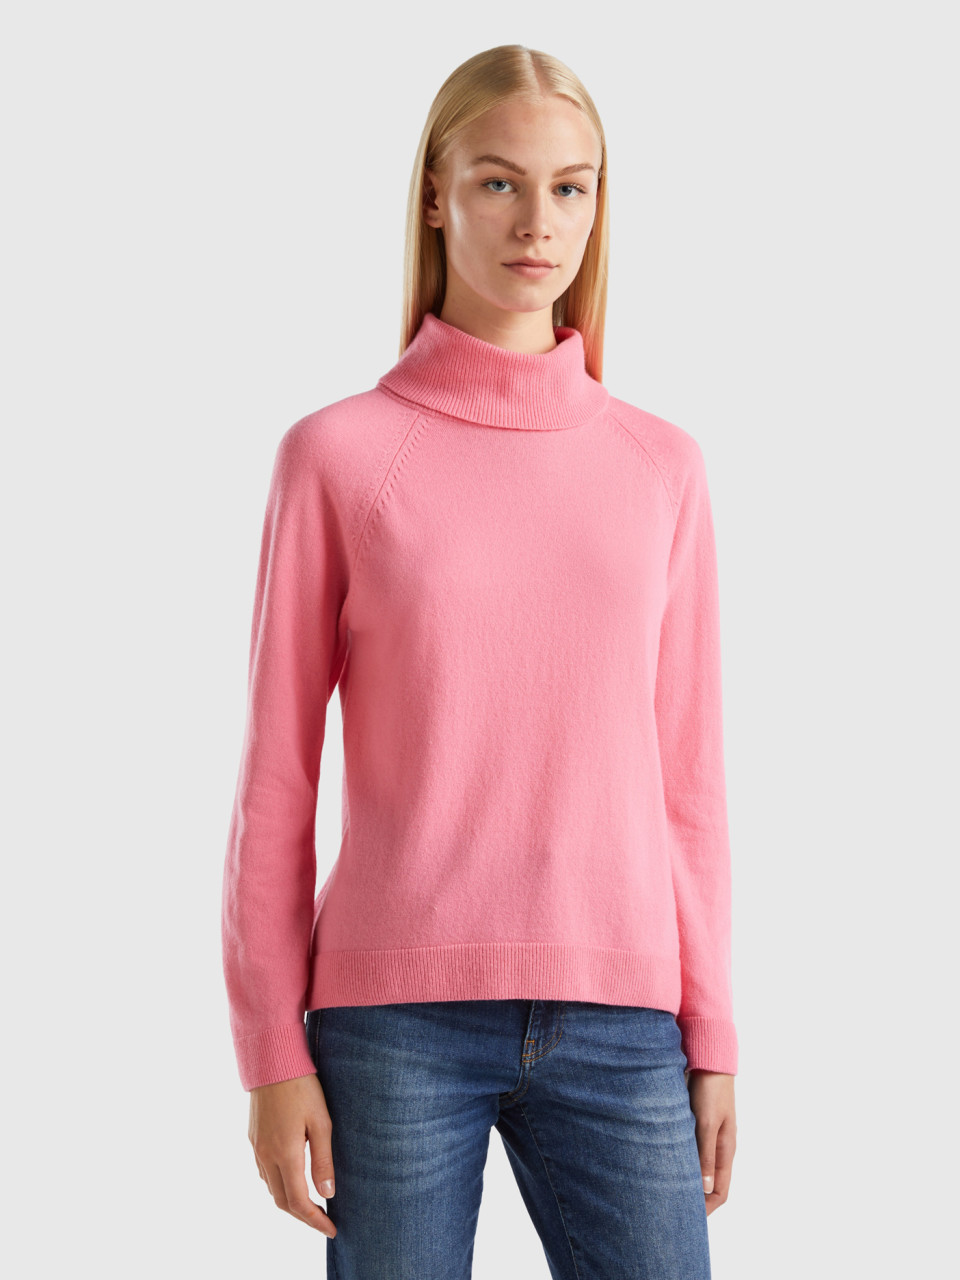 Benetton, Pink Turtleneck In Wool And Cashmere Blend, Pink, Women